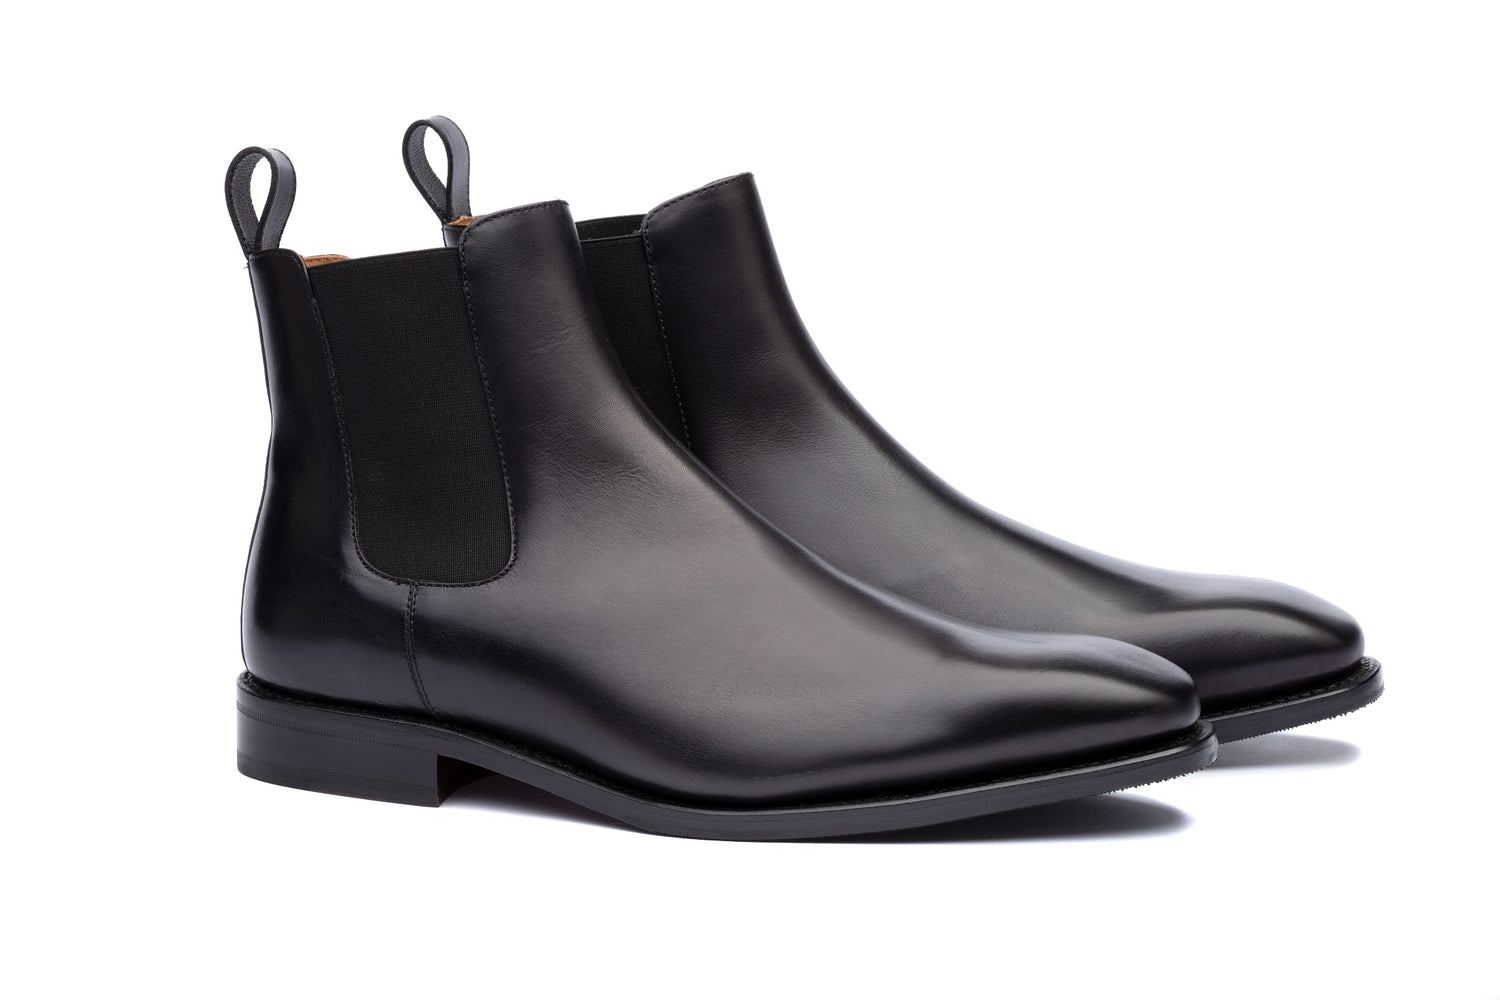 Black Chelsea Boots - Boots by Urbbana